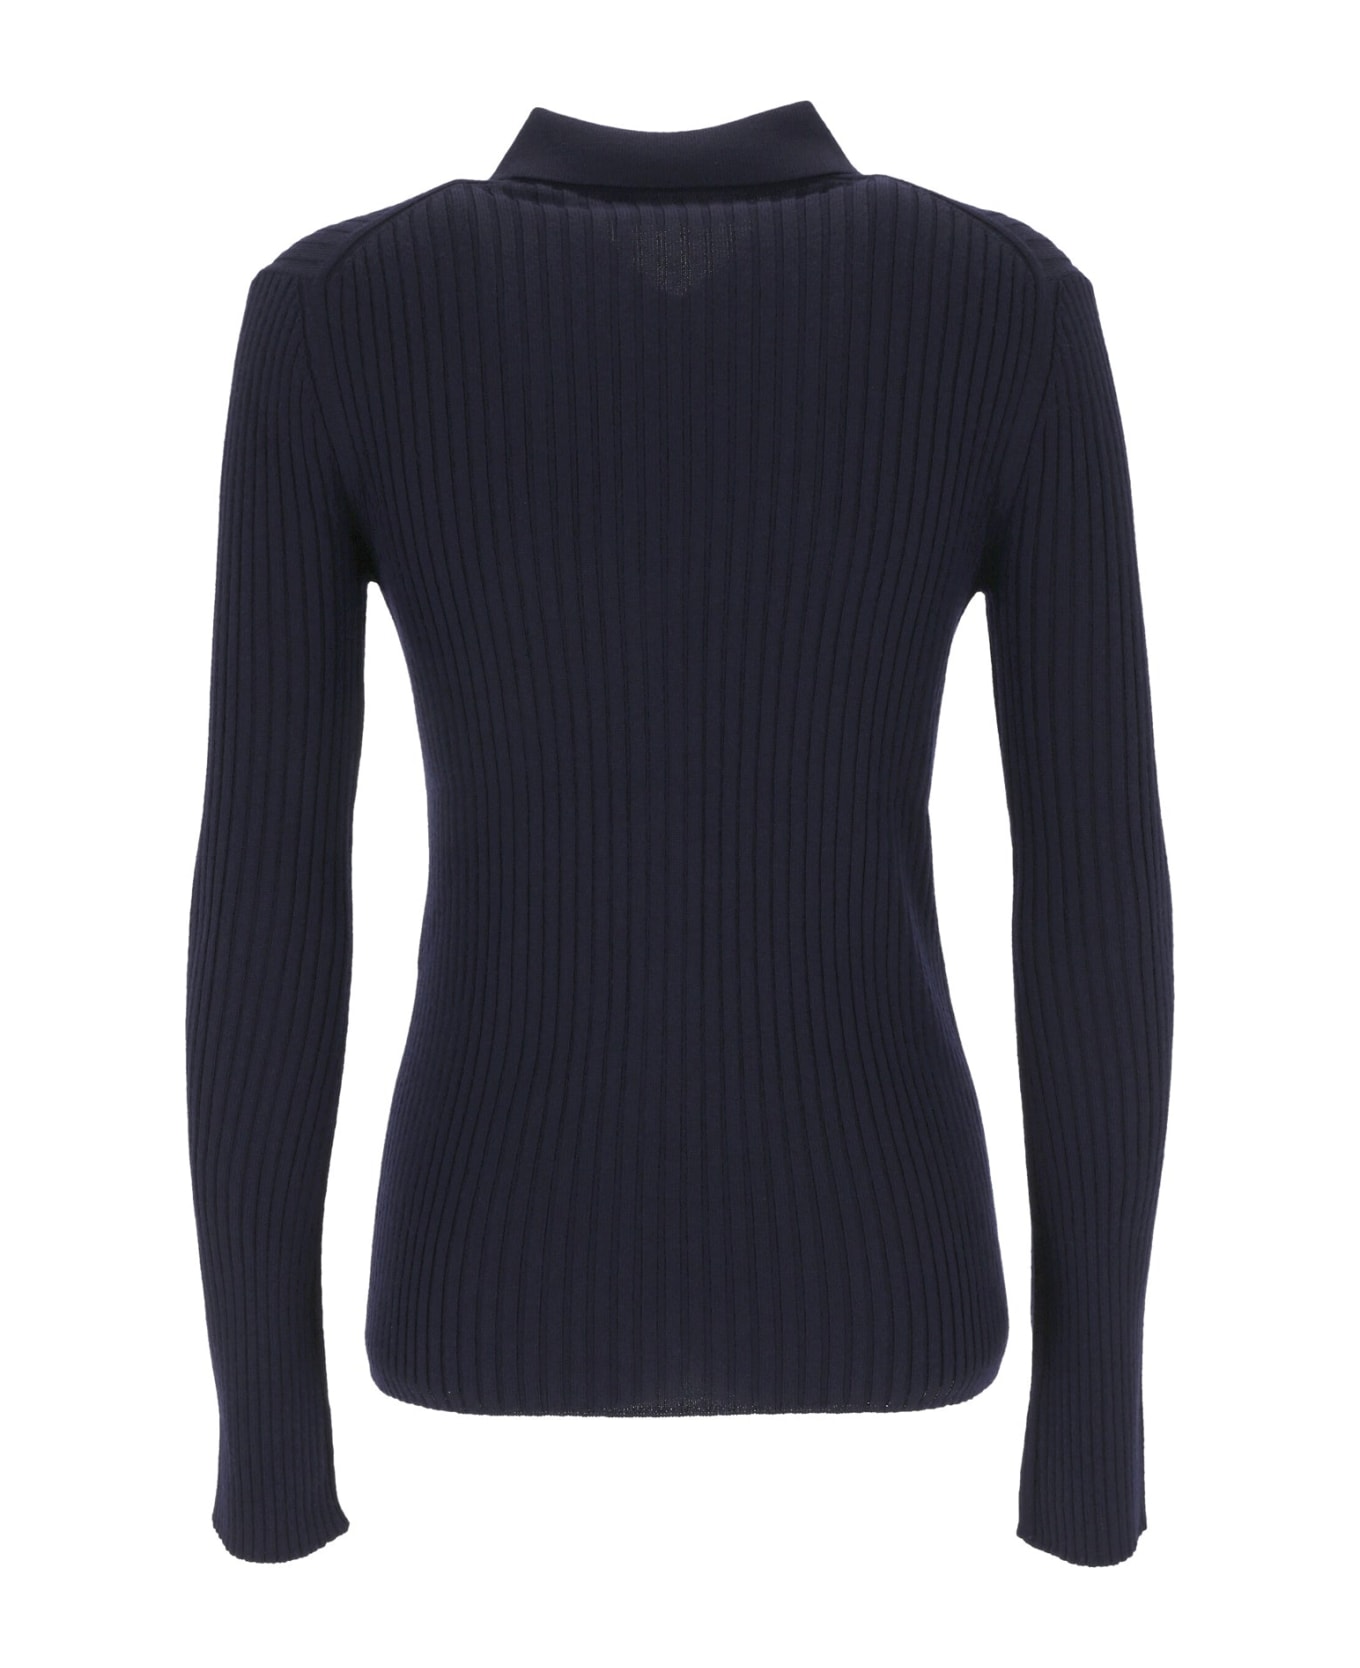 Chloé Wool And Cashmere Shirt - Blue カーディガン